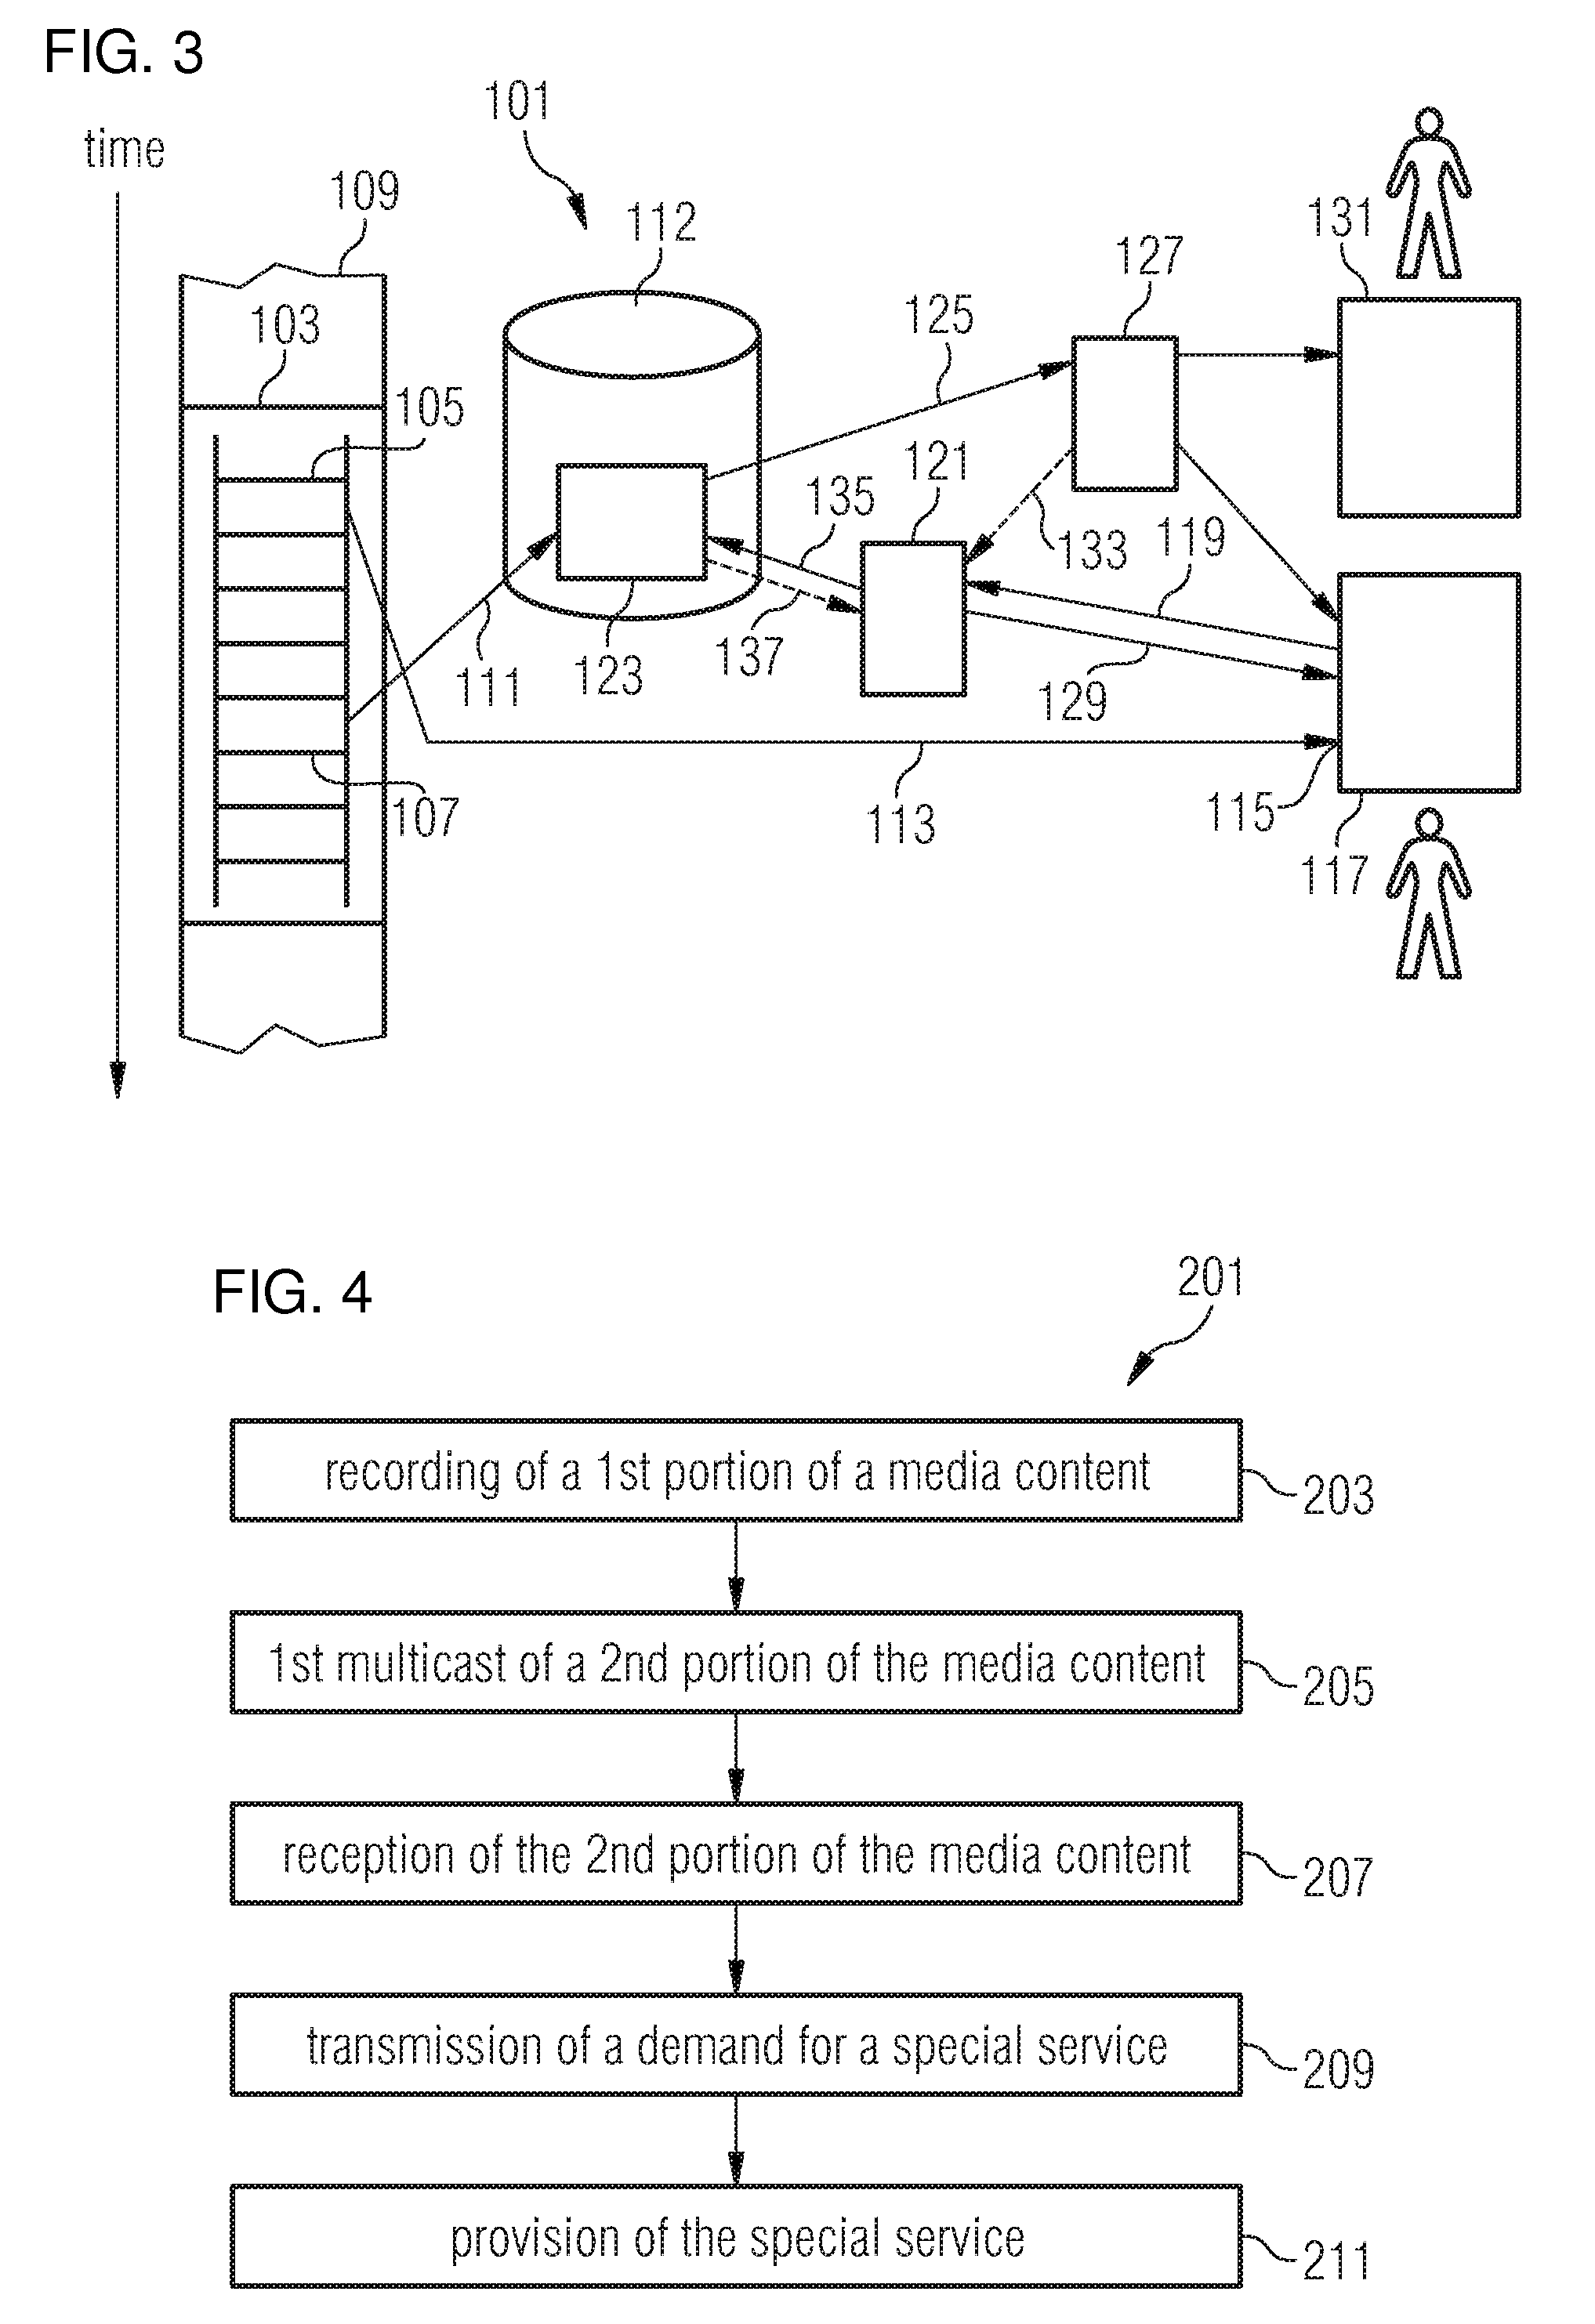 Load control for a television distribution system